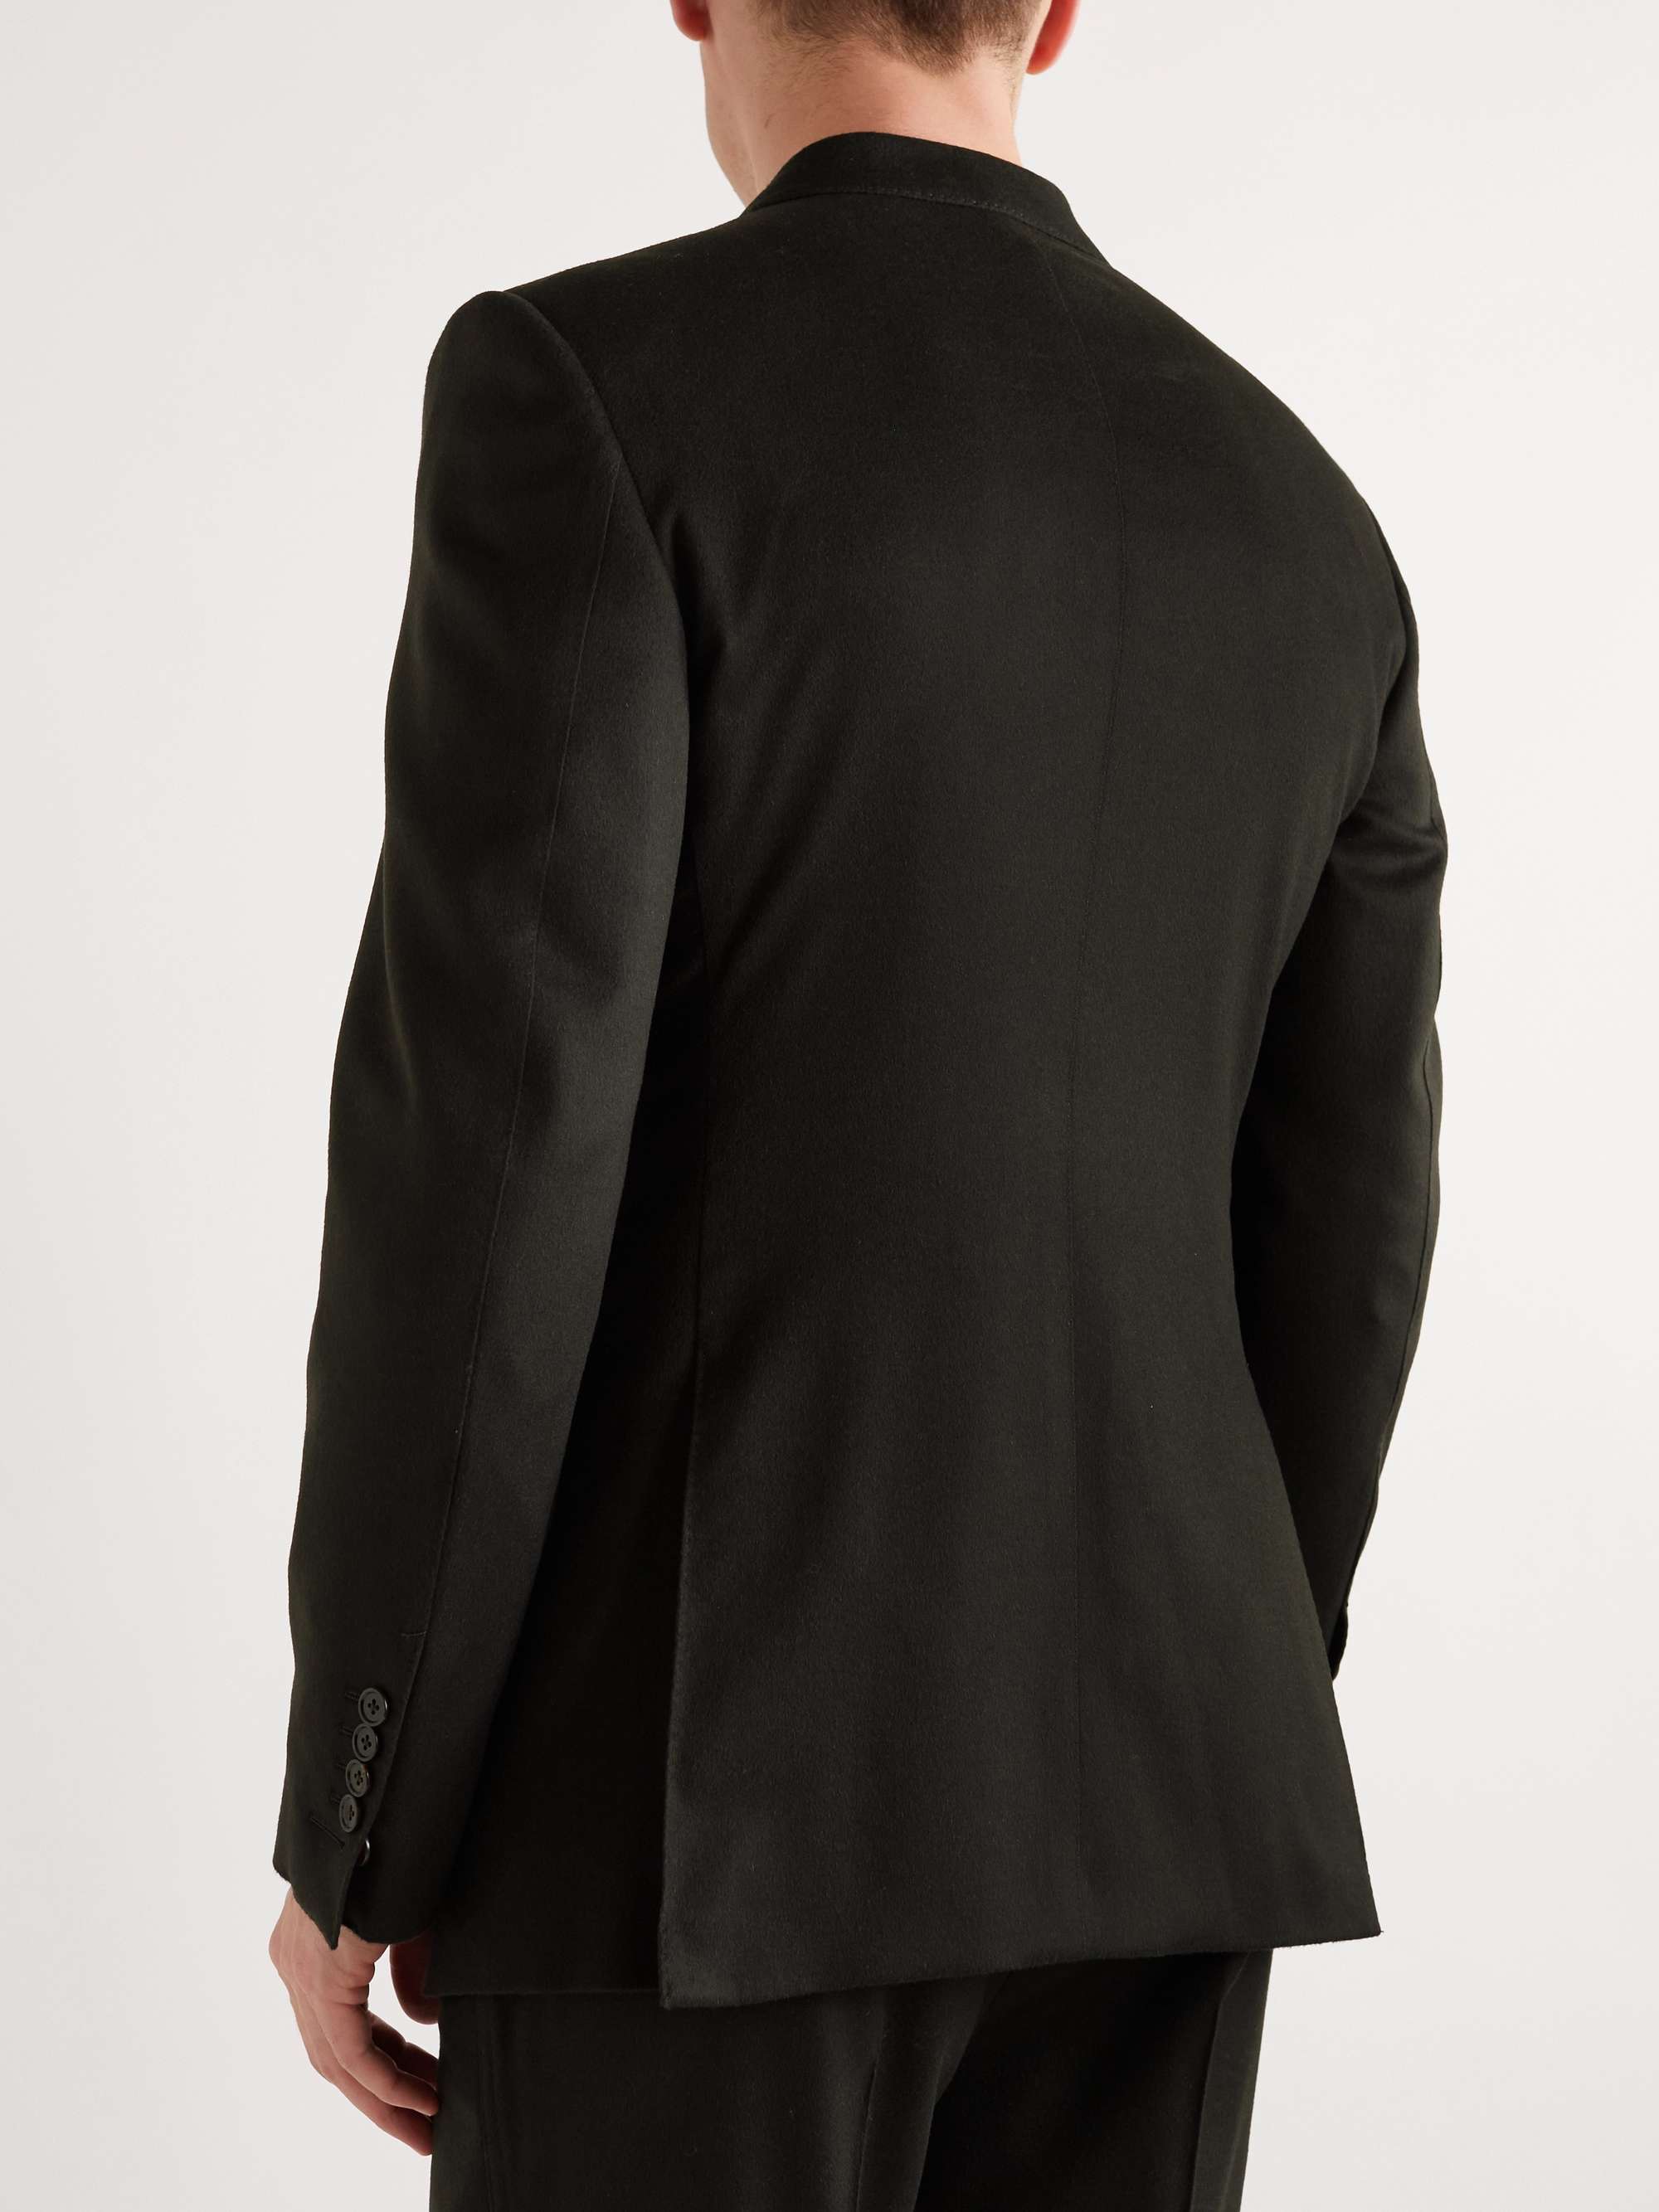 TOM FORD O'Connor Slim-Fit Unstructured Cashmere Suit Jacket